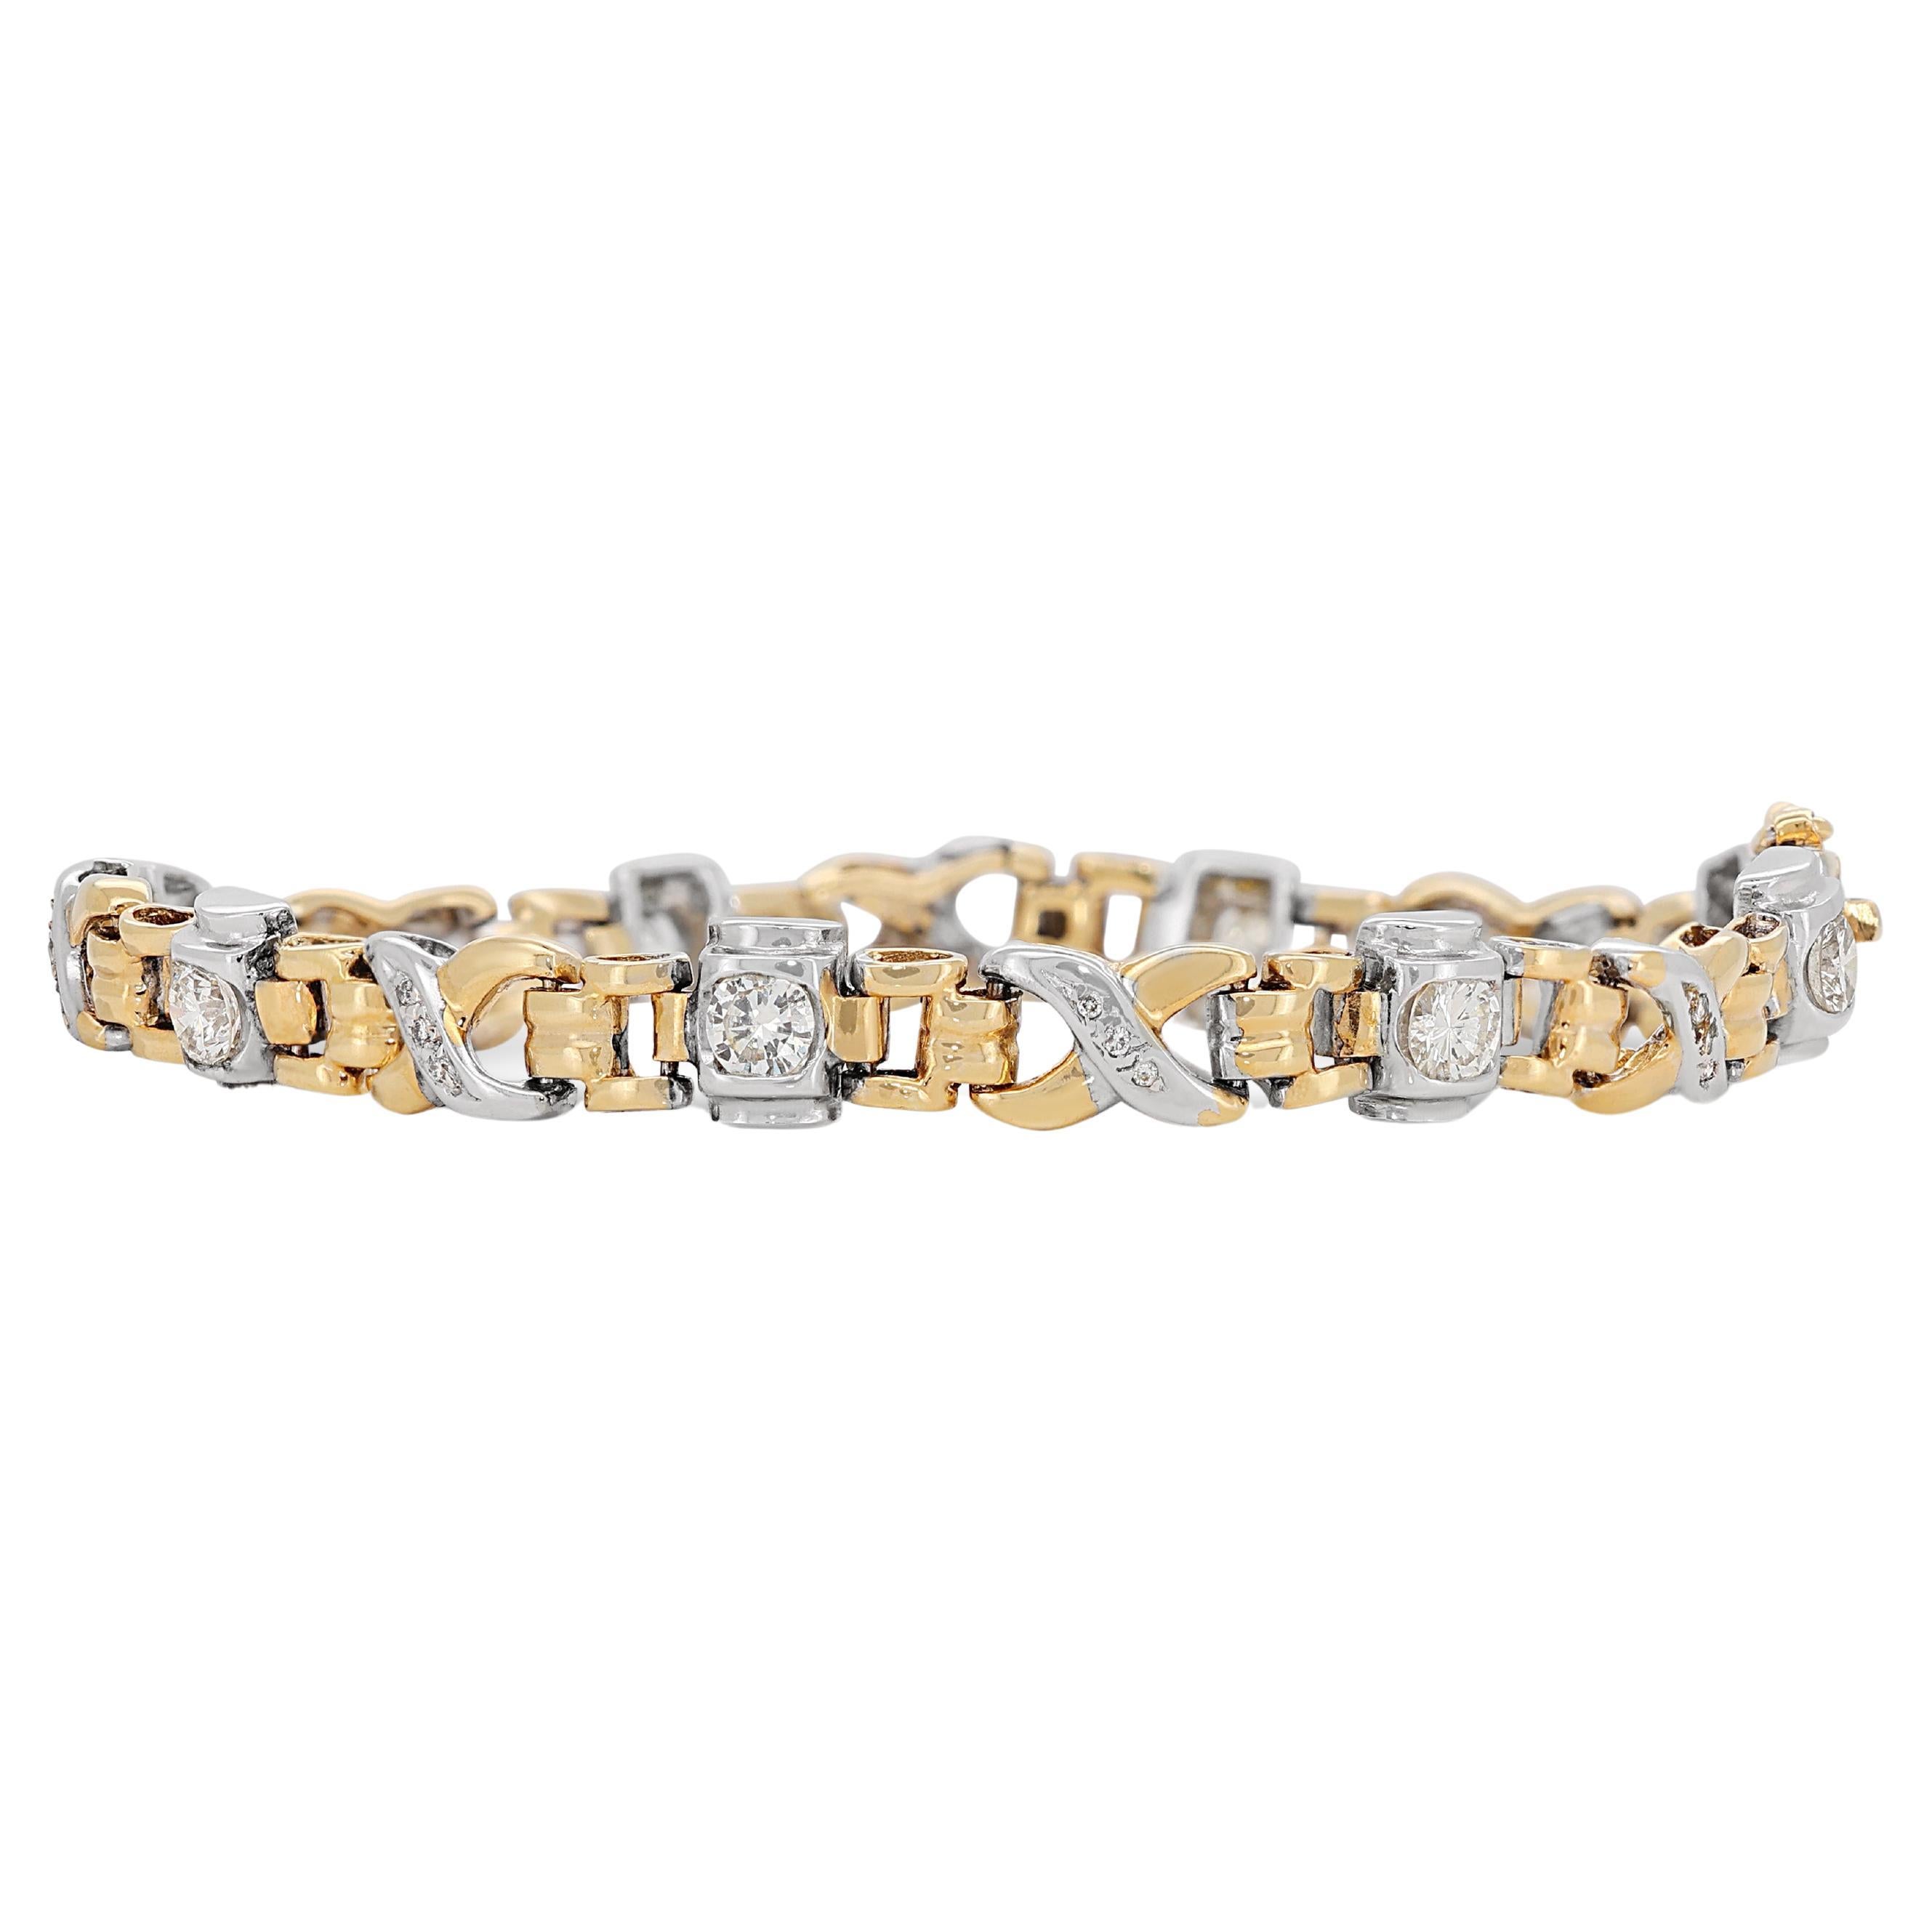 Exquisite 1.44ct Diamonds Bracelet in 18K White and Yellow Gold For Sale